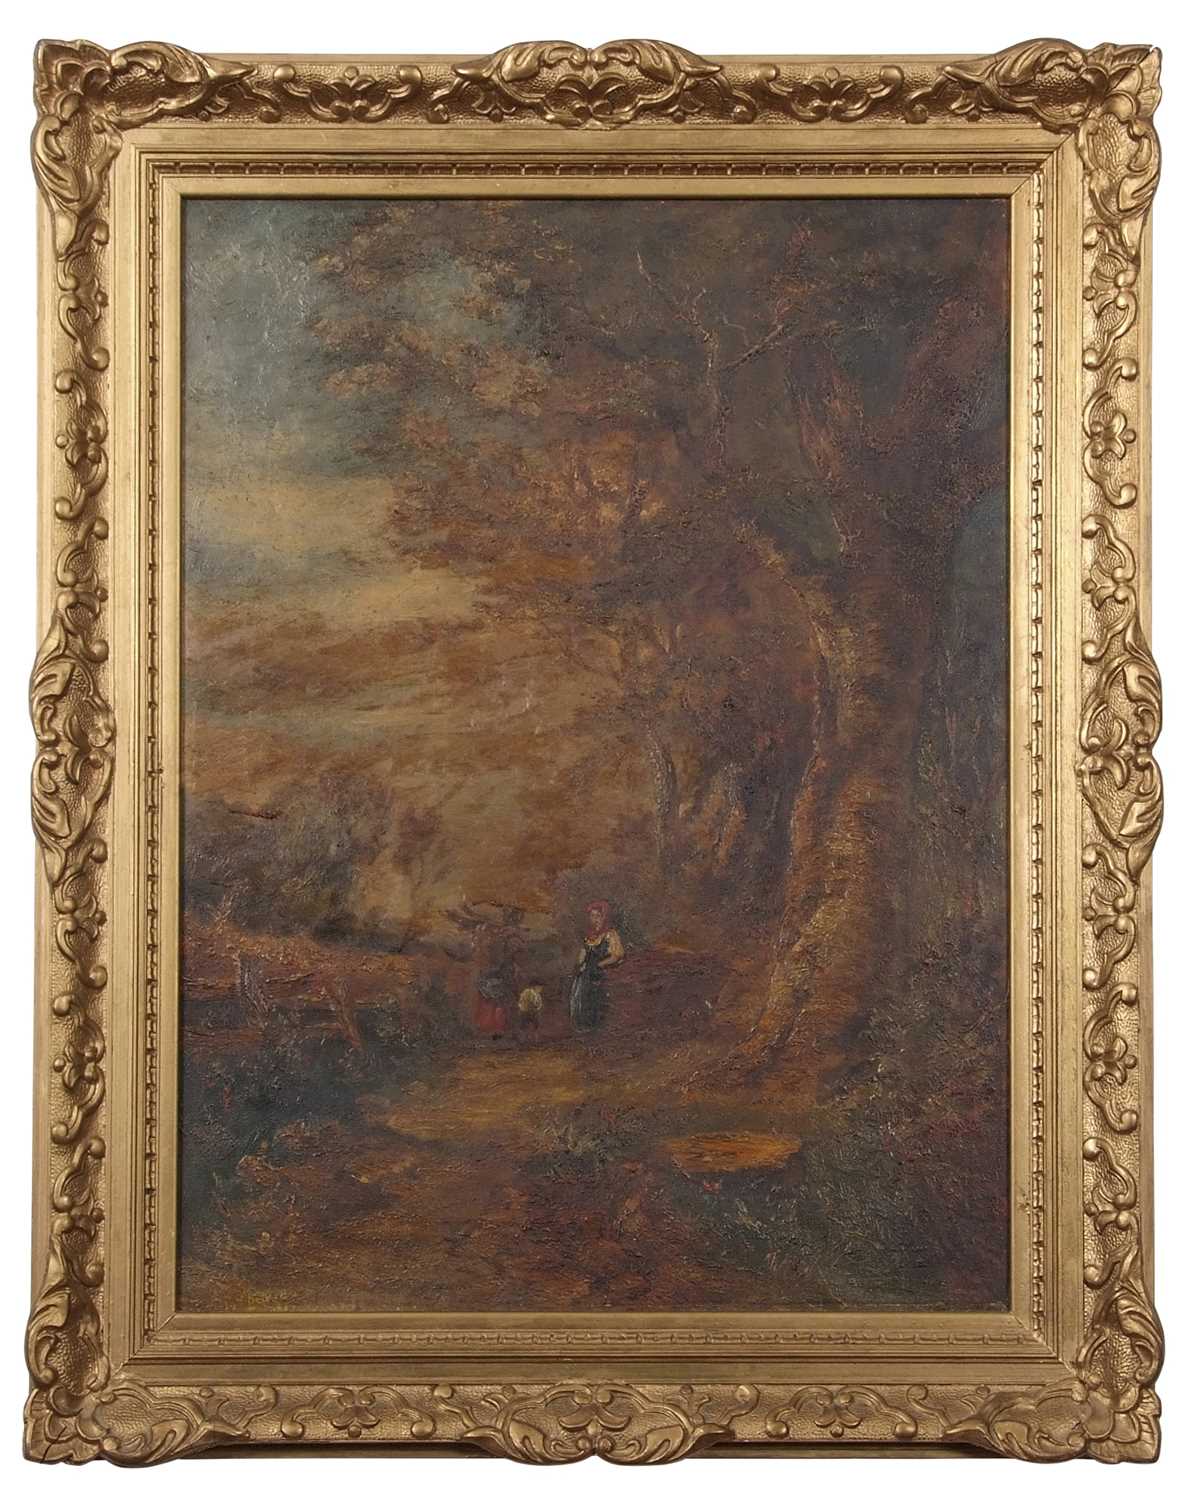 French School, 19th Century, A woodland scene with figures along a path, oil on canvas, 24x17insQty: